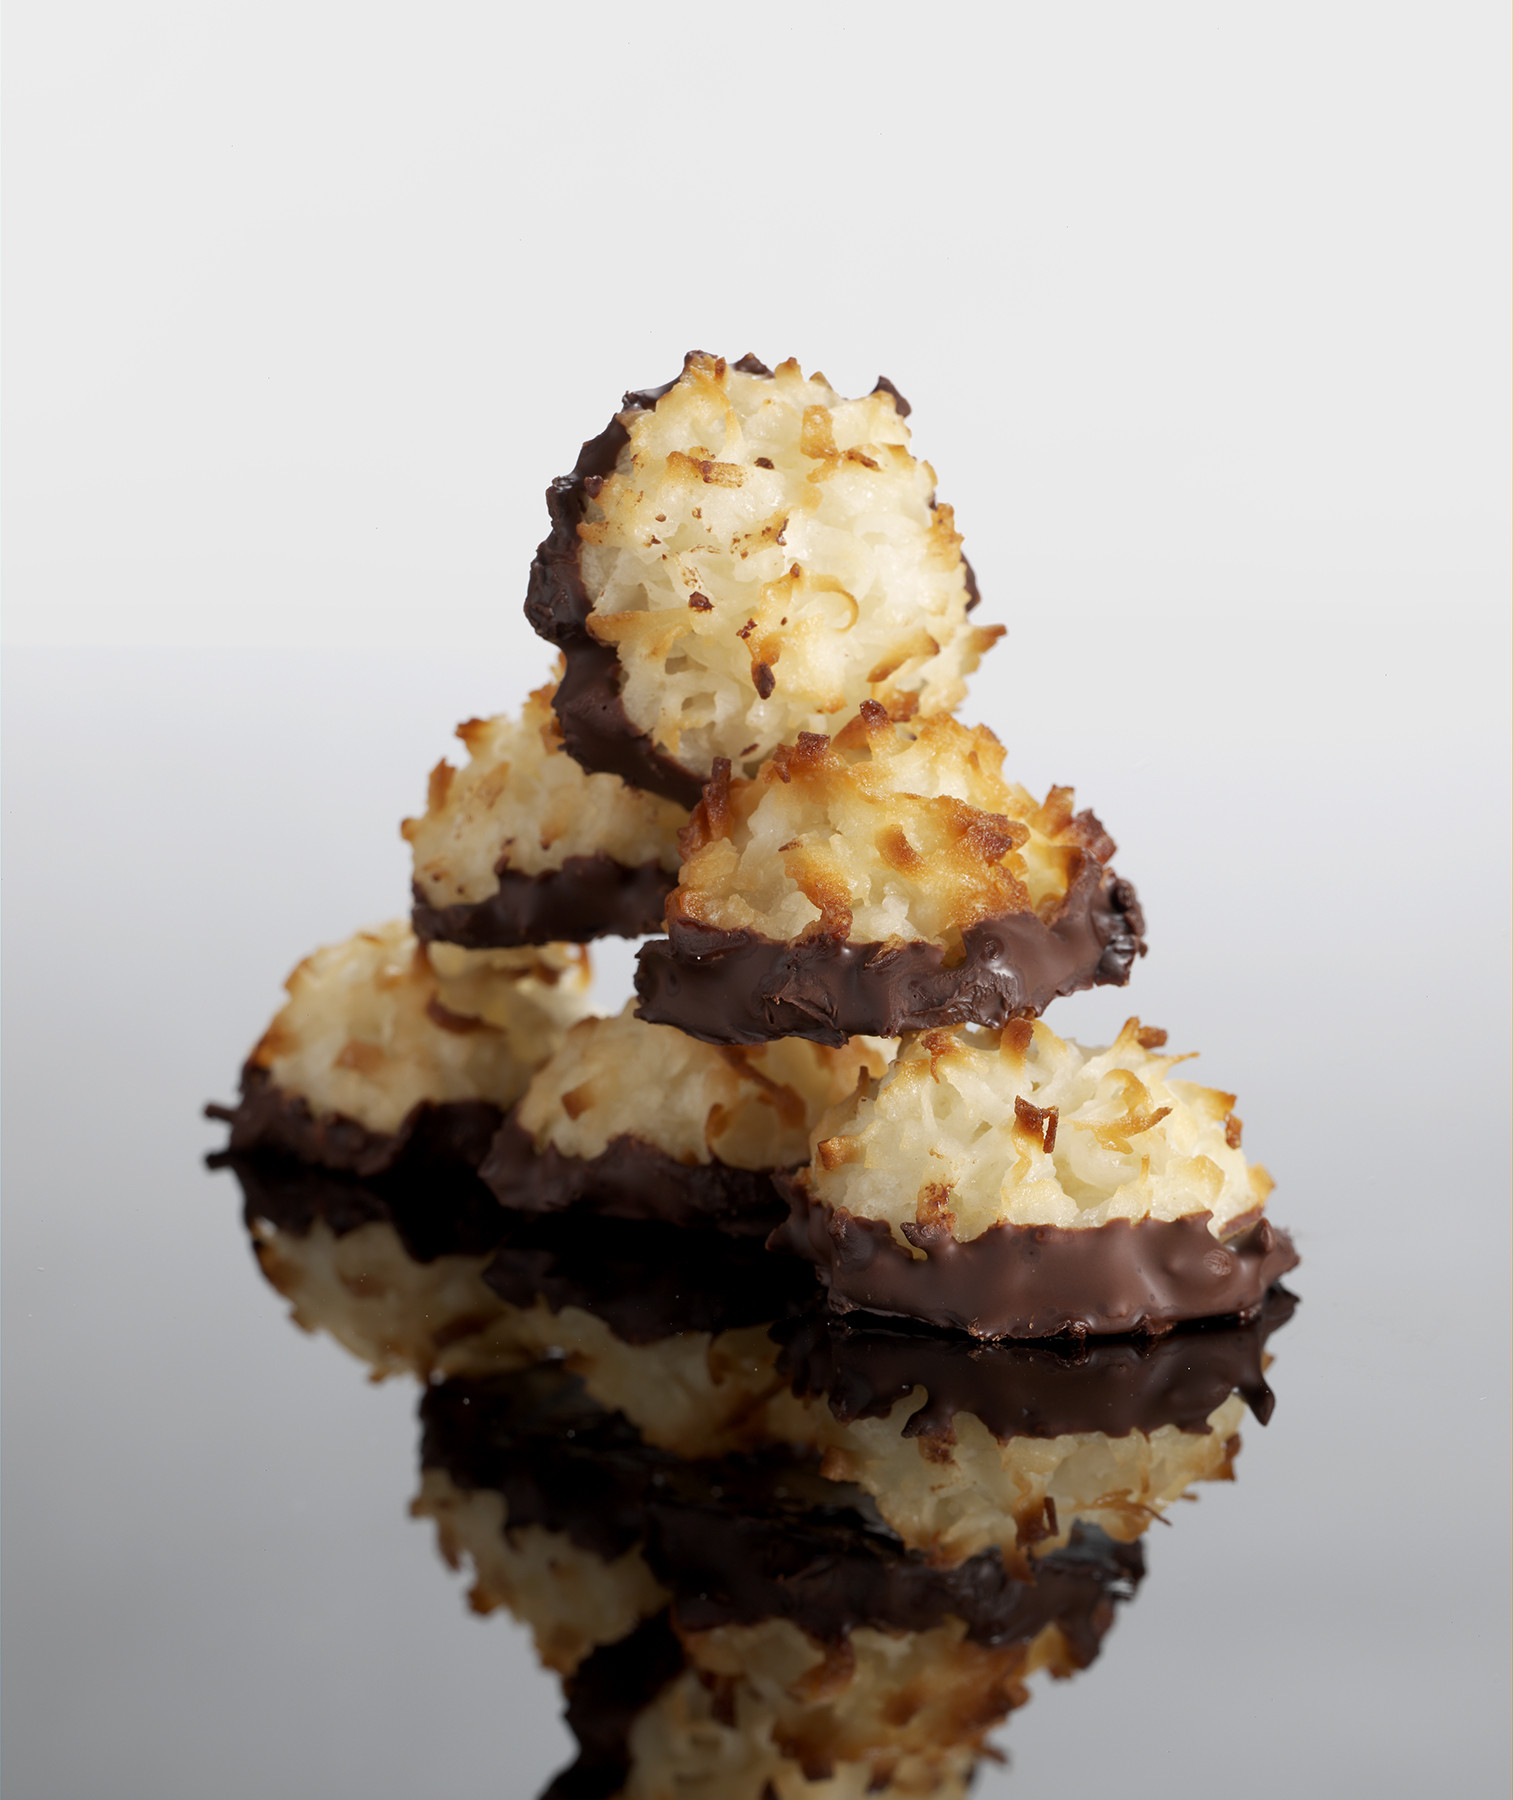 Chocolate Dipped Coconut Macaroons Luxury Chocolate Dipped Coconut Macaroons Recipe